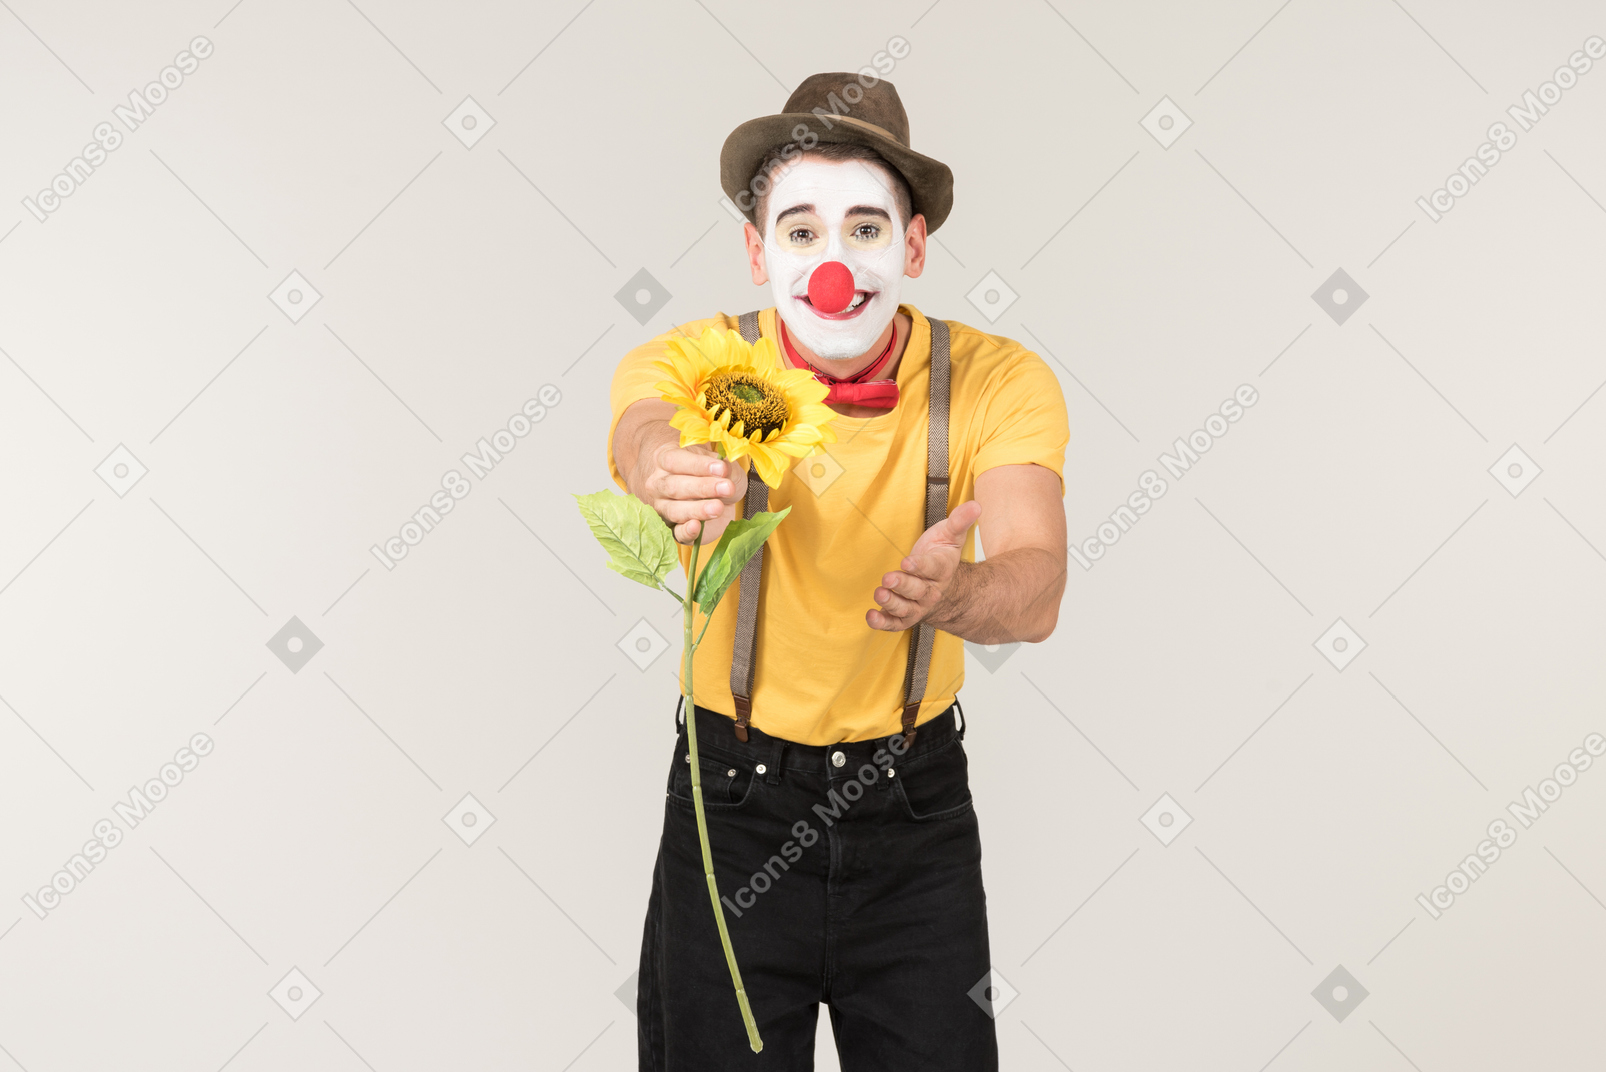 Male clown passing on a sunflower